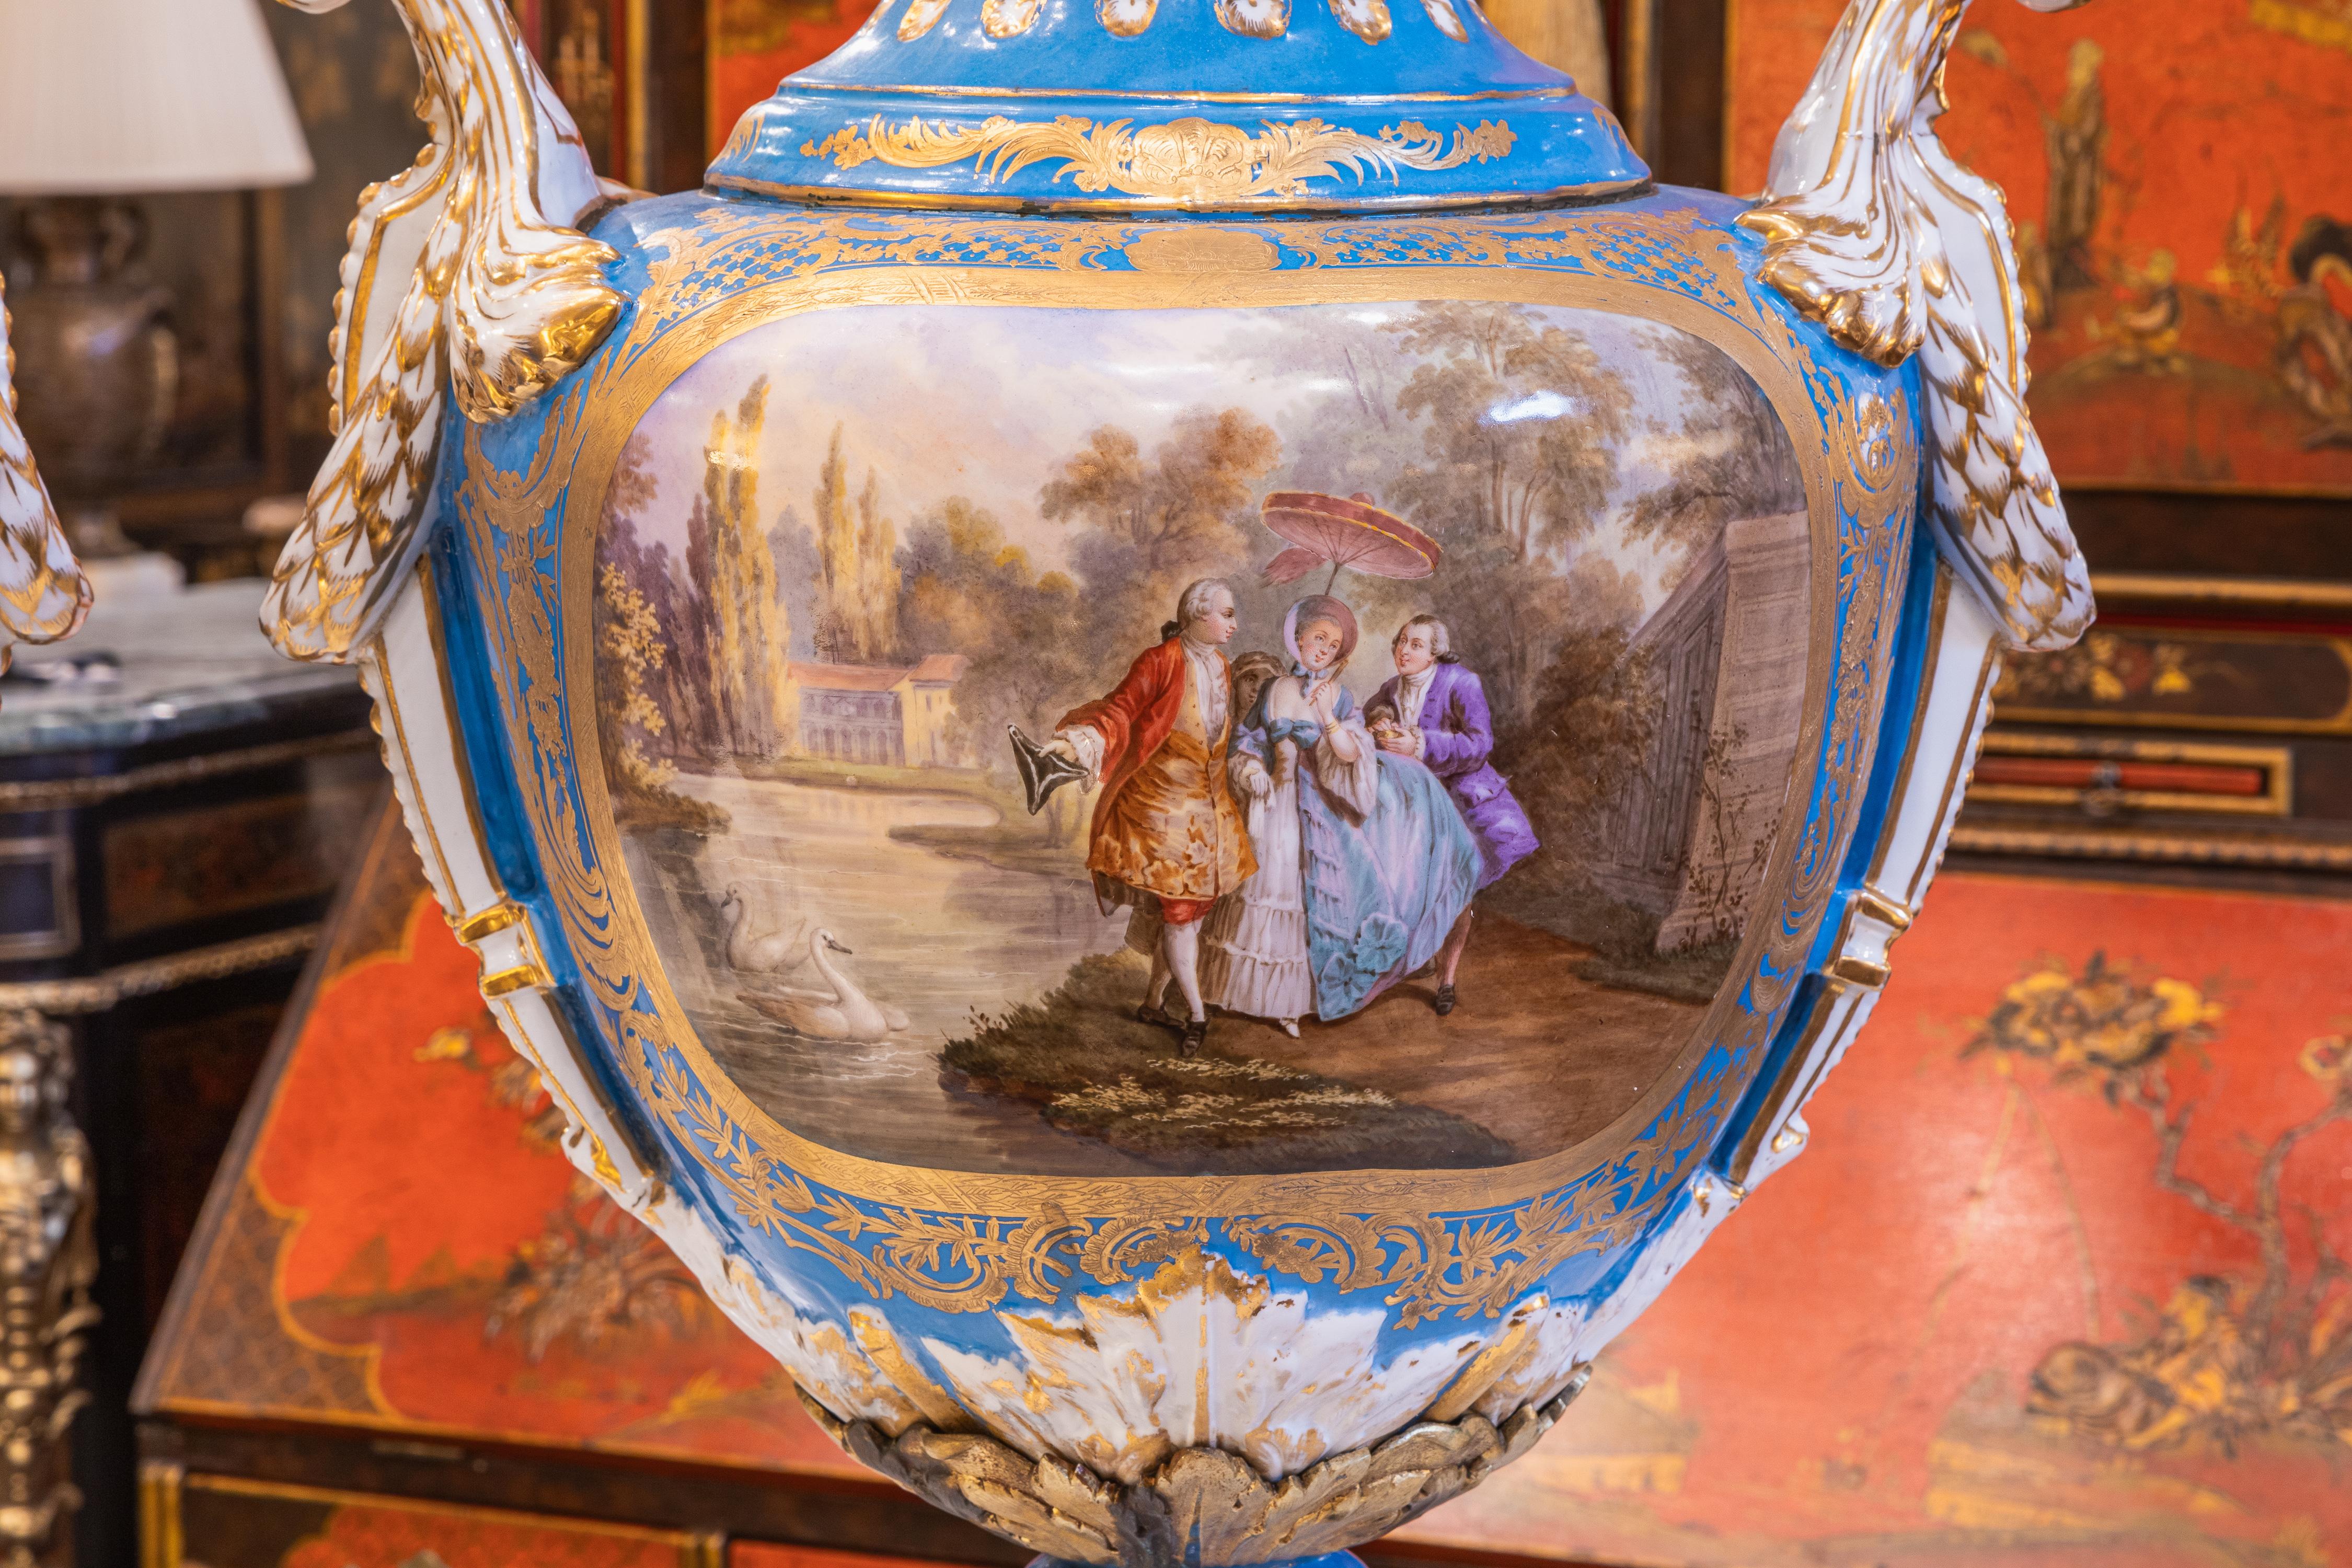 A very fine pair of late 19th century to early 20th century French Sevre's style palatial porcelain vases. Hand painted and signed scenes of Versailles. 